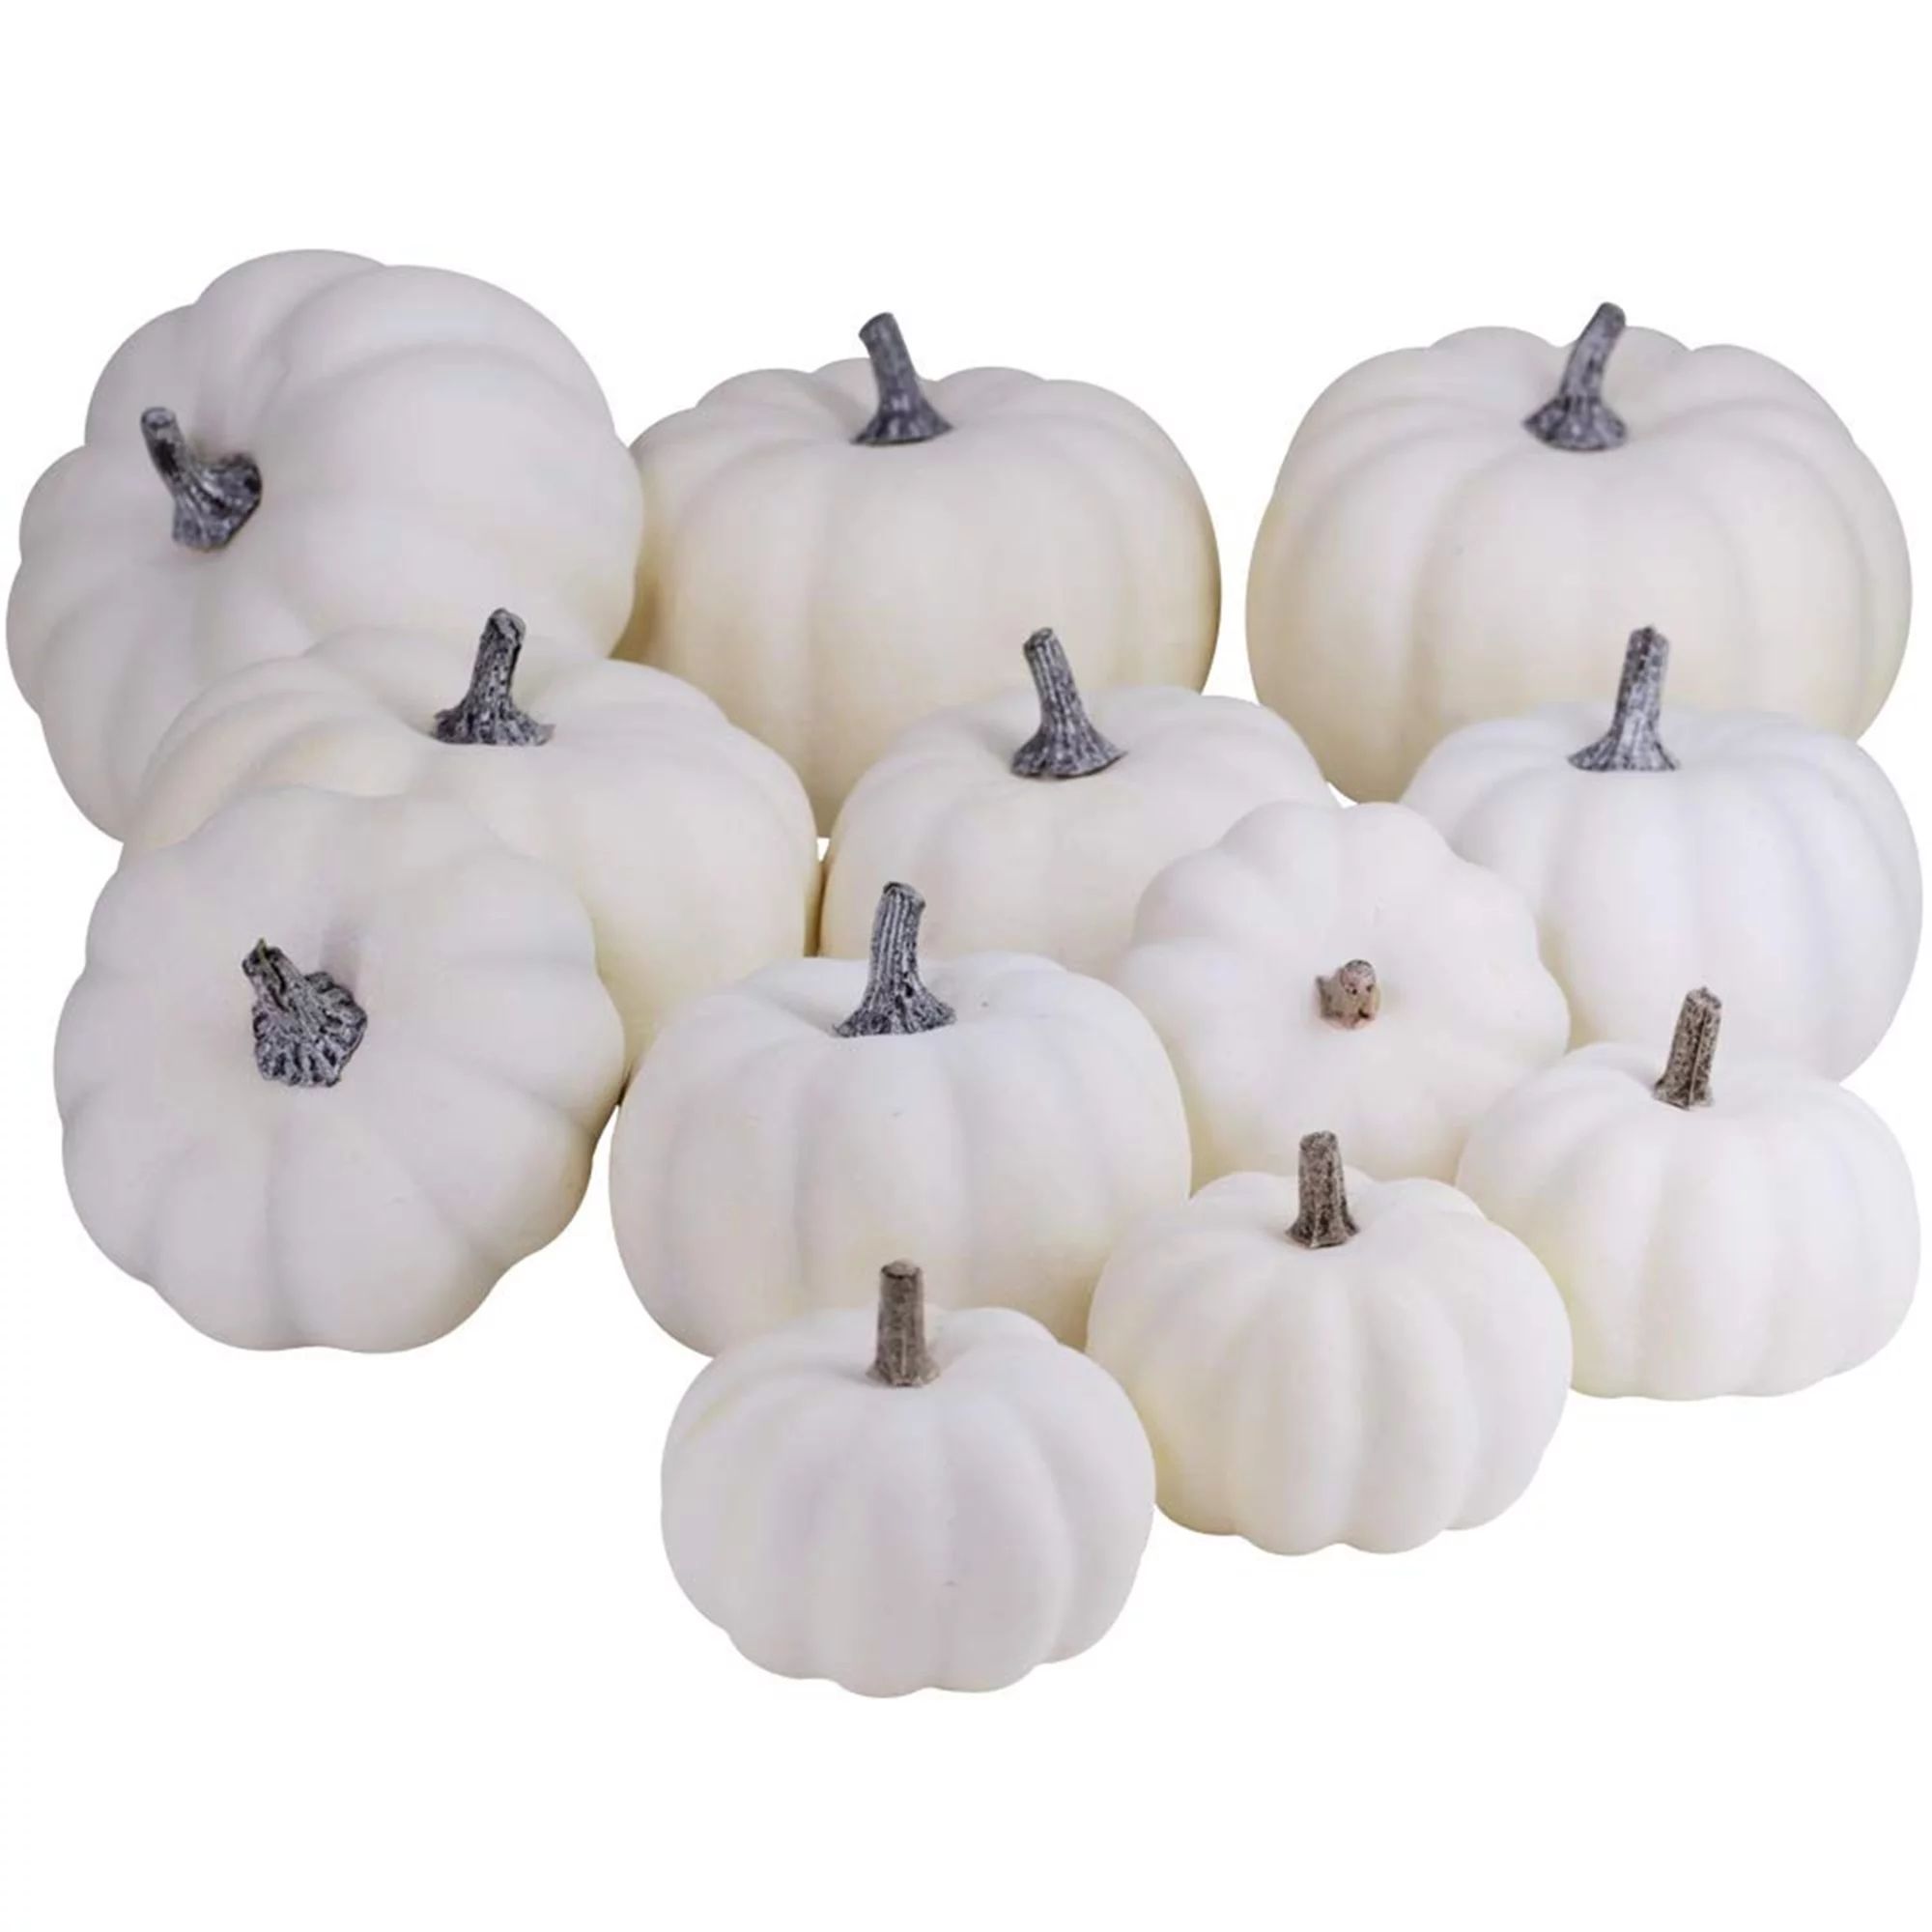 COUTEXYI 12 Pack Halloween White Plastic Artificial Pumpkins for Decor DIY | Walmart (US)